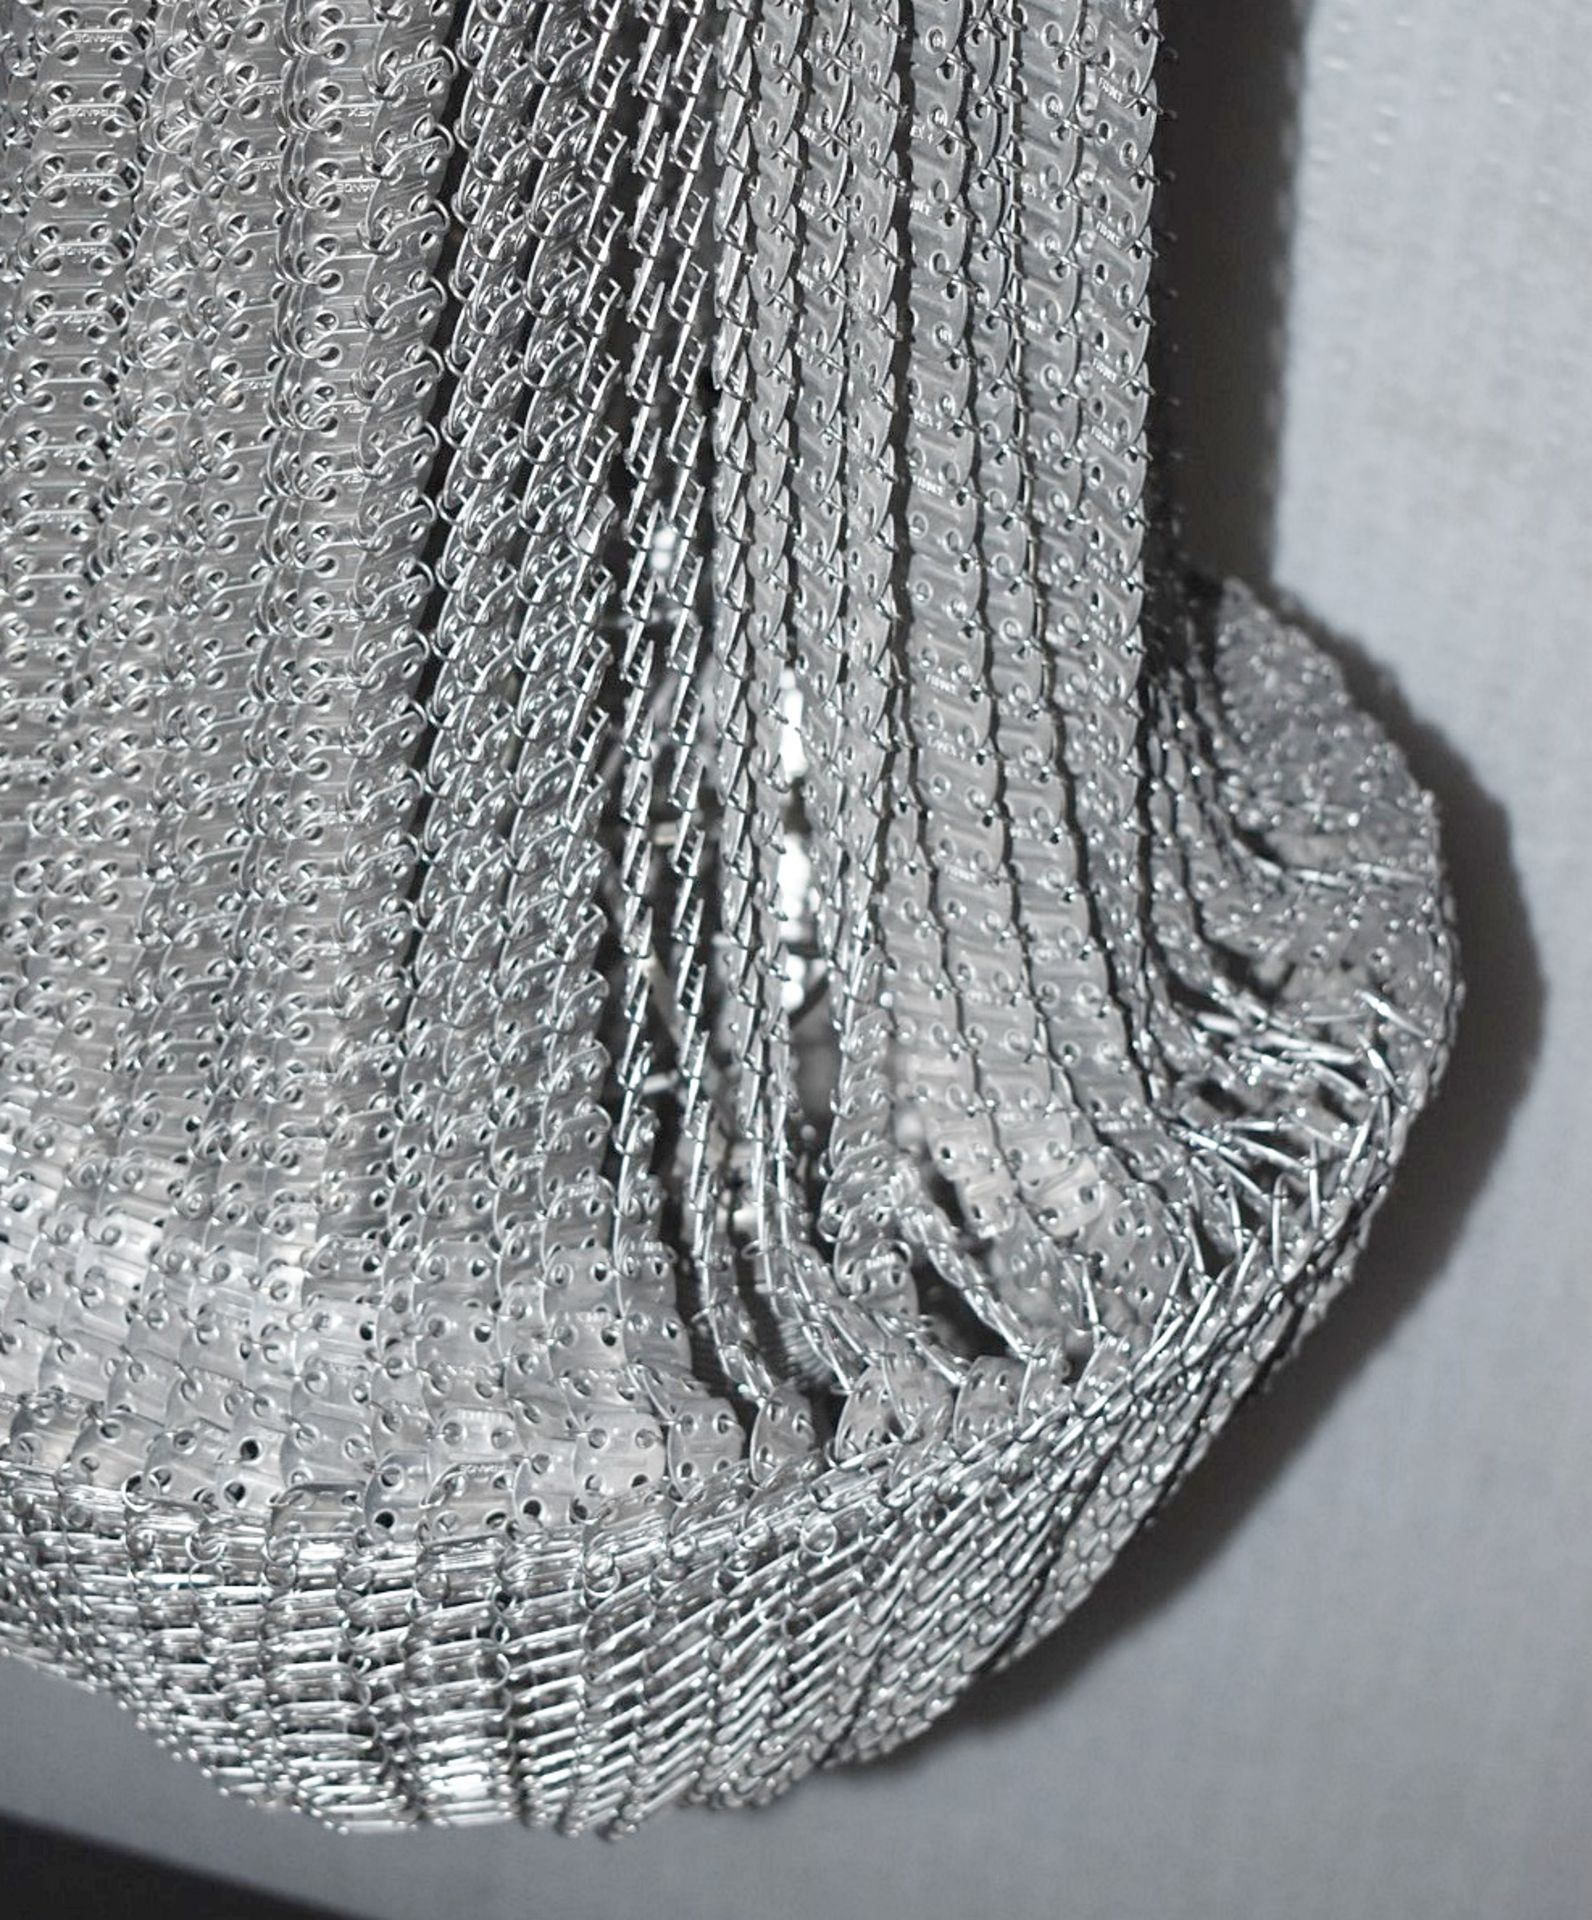 1 x Opulent Chainmail Chandelier with Crystal Glass Droplets - Procured From An Exclusive Property - Image 3 of 8